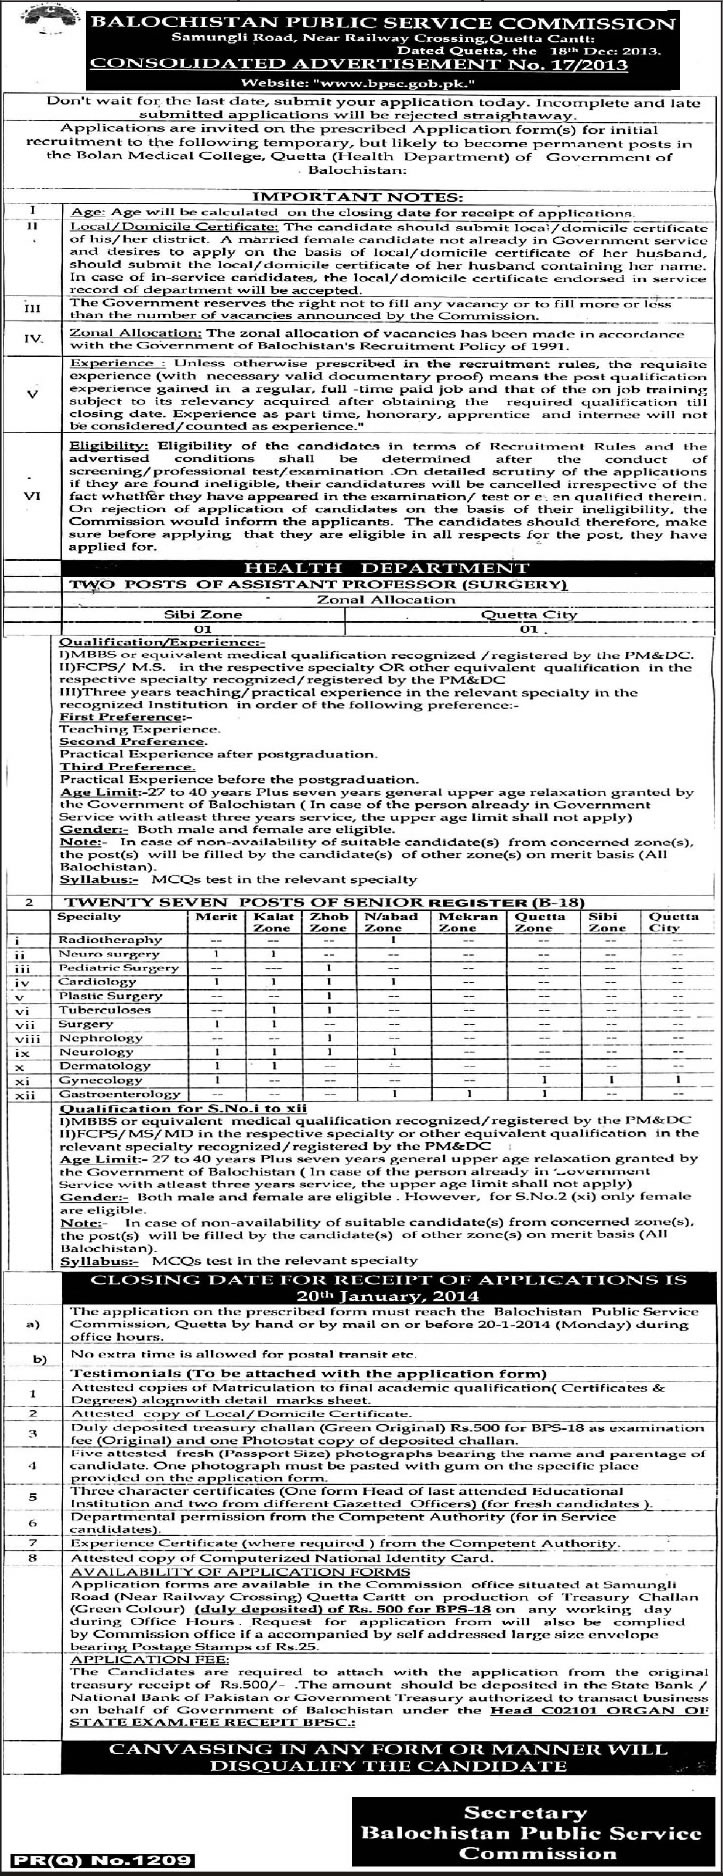 BPSC Jobs December 2013 Consolidated Advertisement No. 17/2013